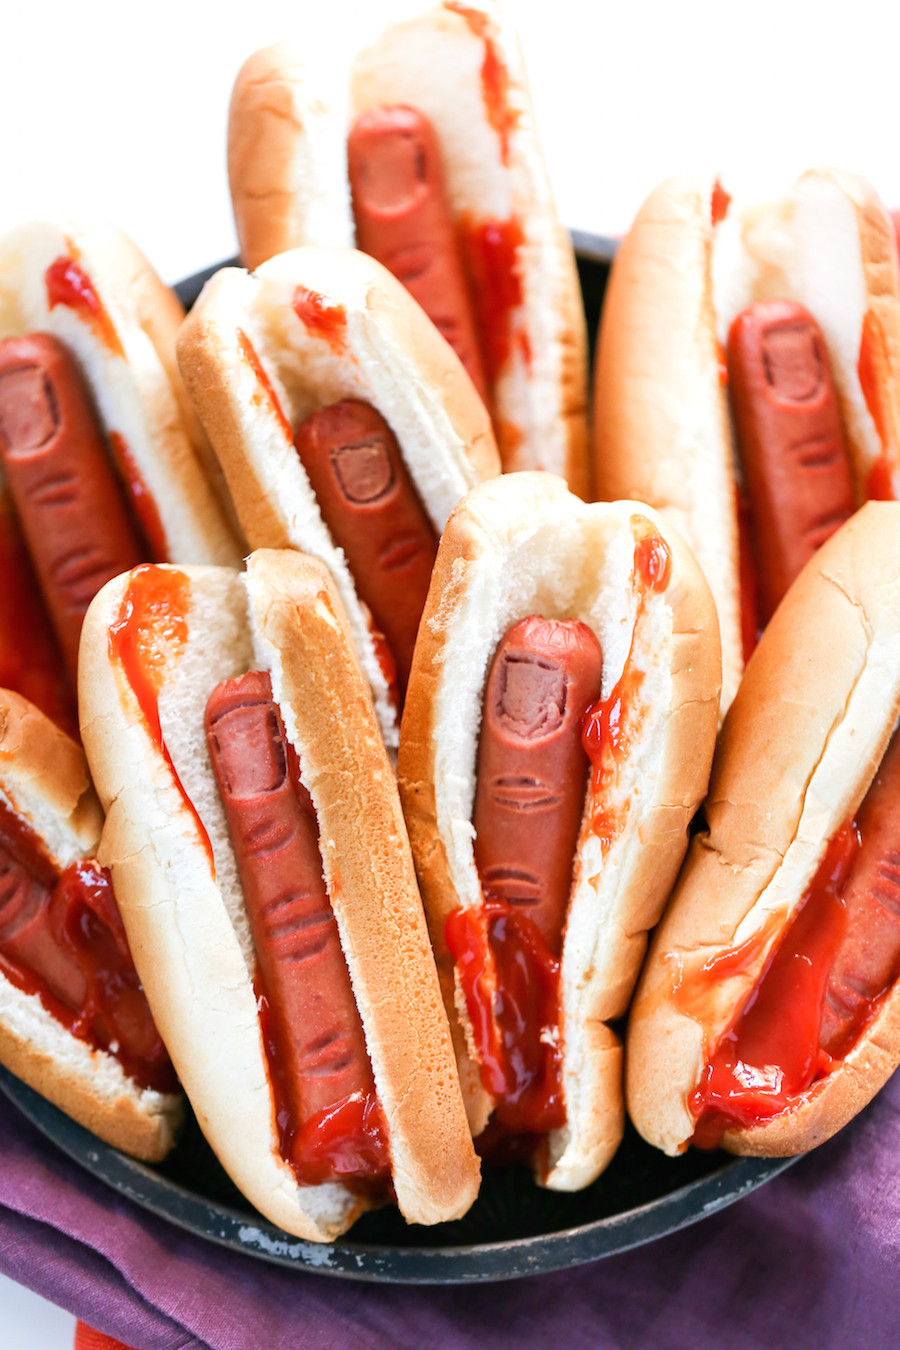 Gross Ideas For Halloween Party
 Bloody Finger Hot Dogs for Halloween